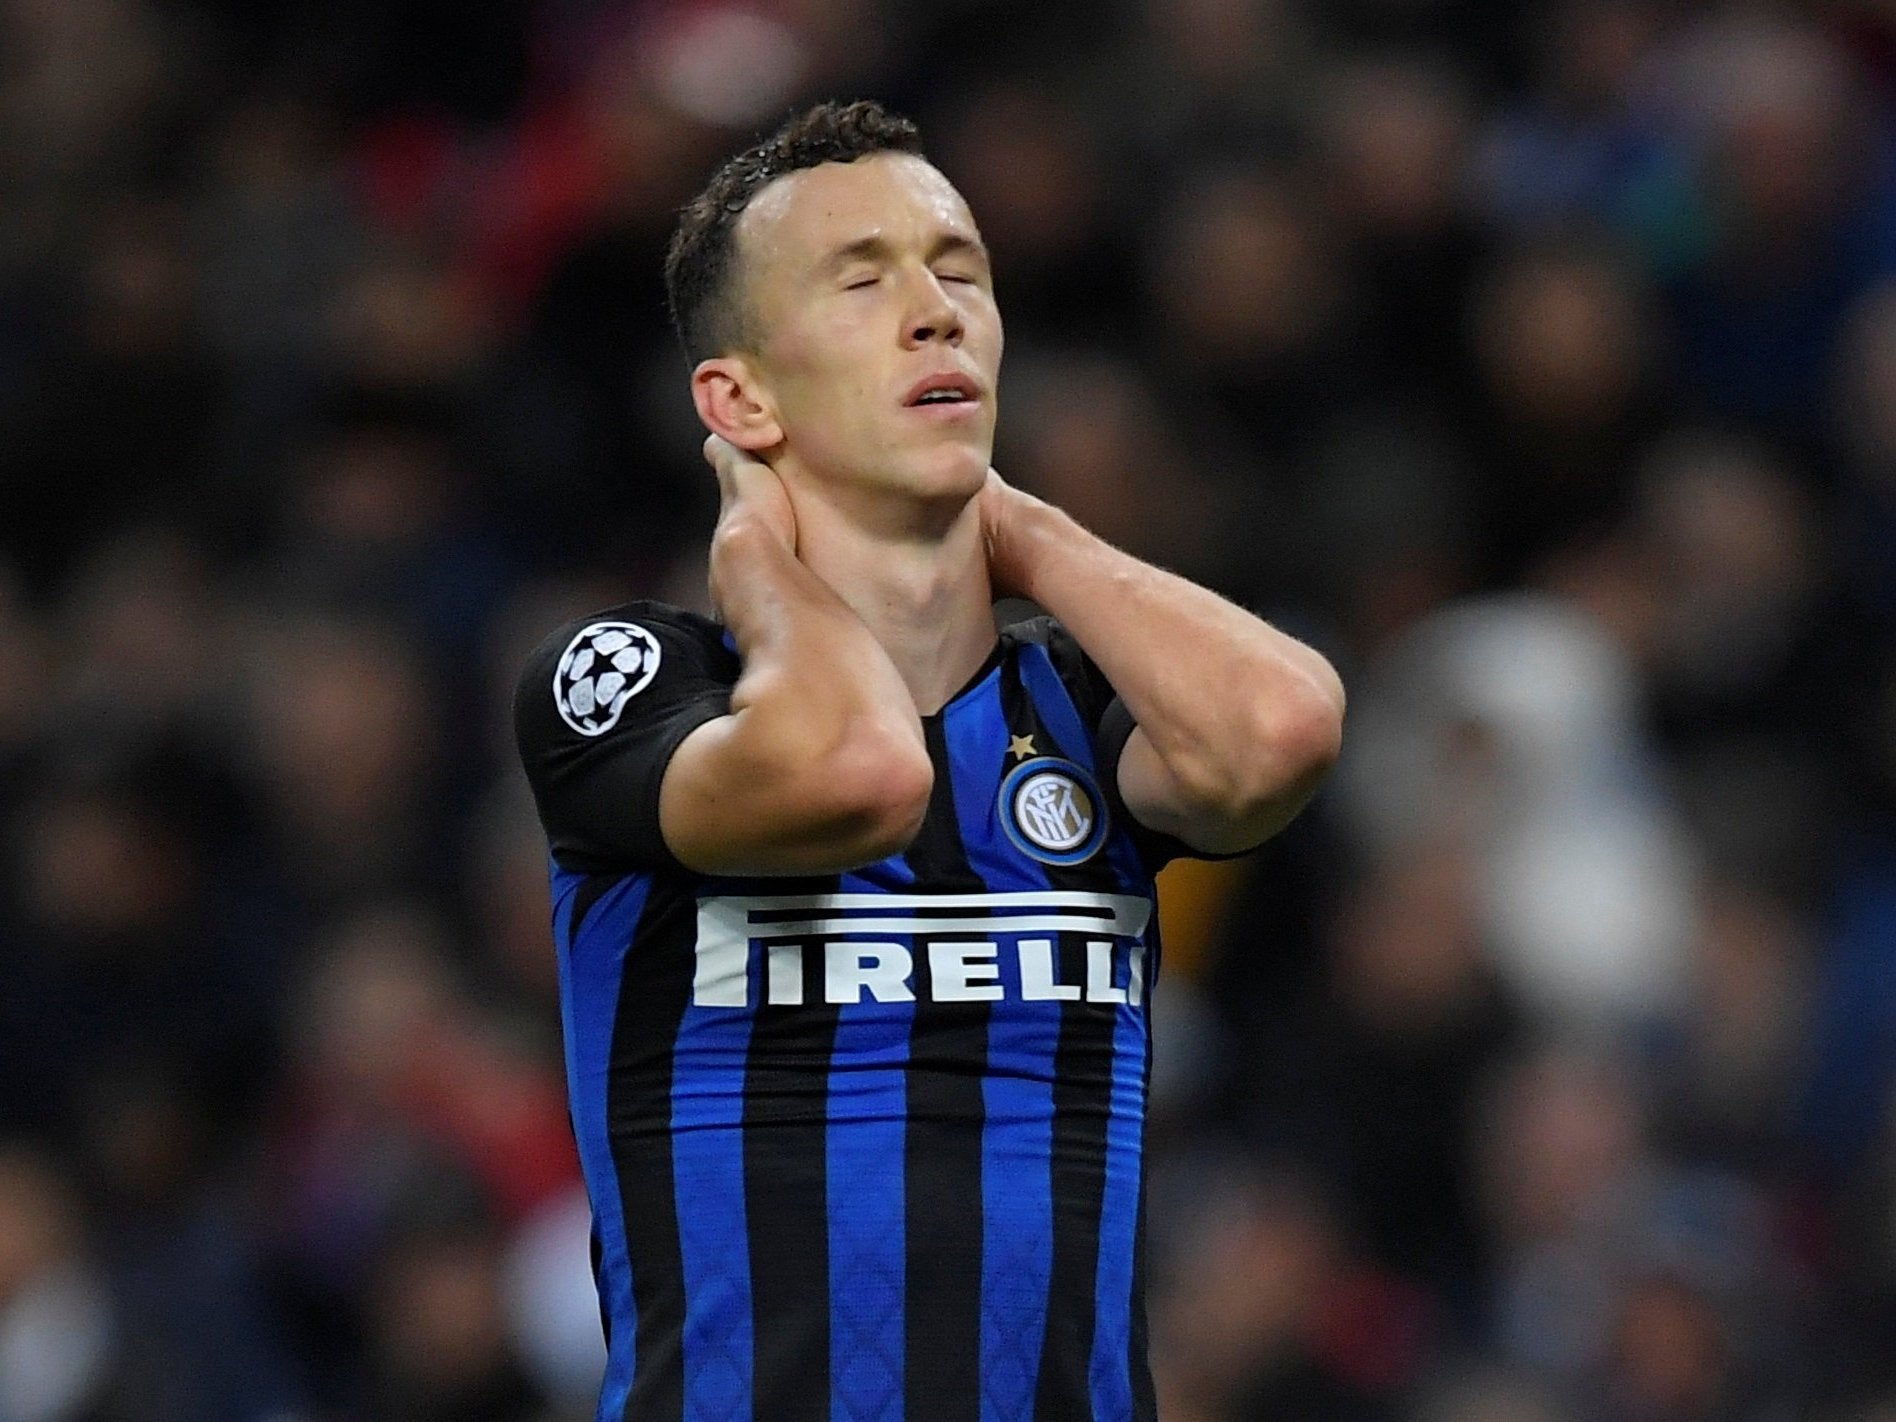 Perisic is unlikely to leave Inter